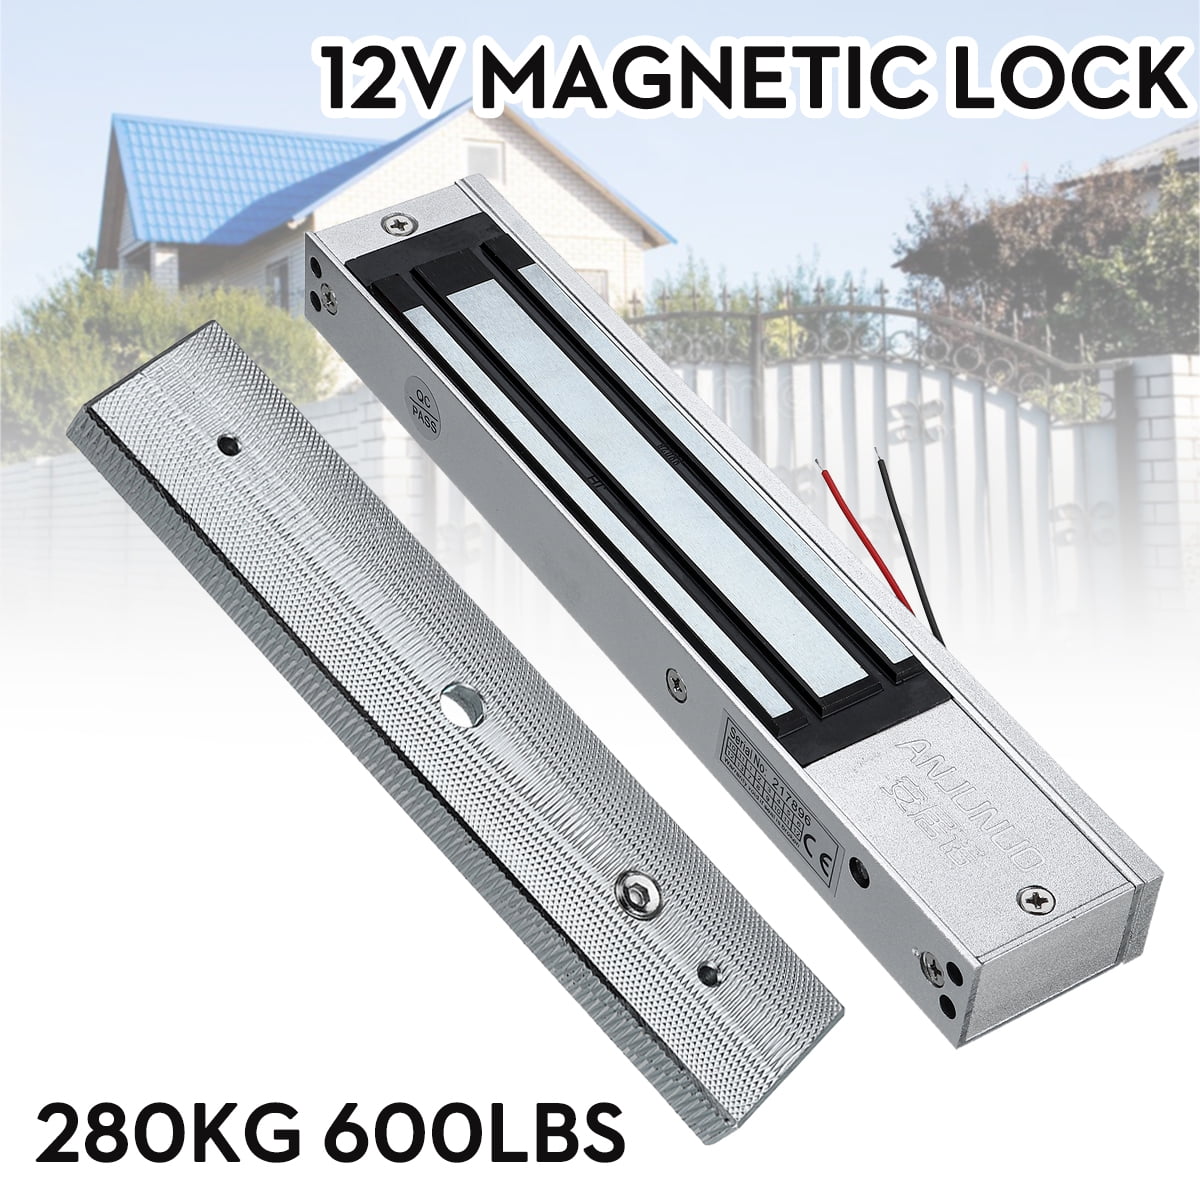 Holding Force Electric Magnetic Lock Door Security System 600Lbs/280KG 12V 